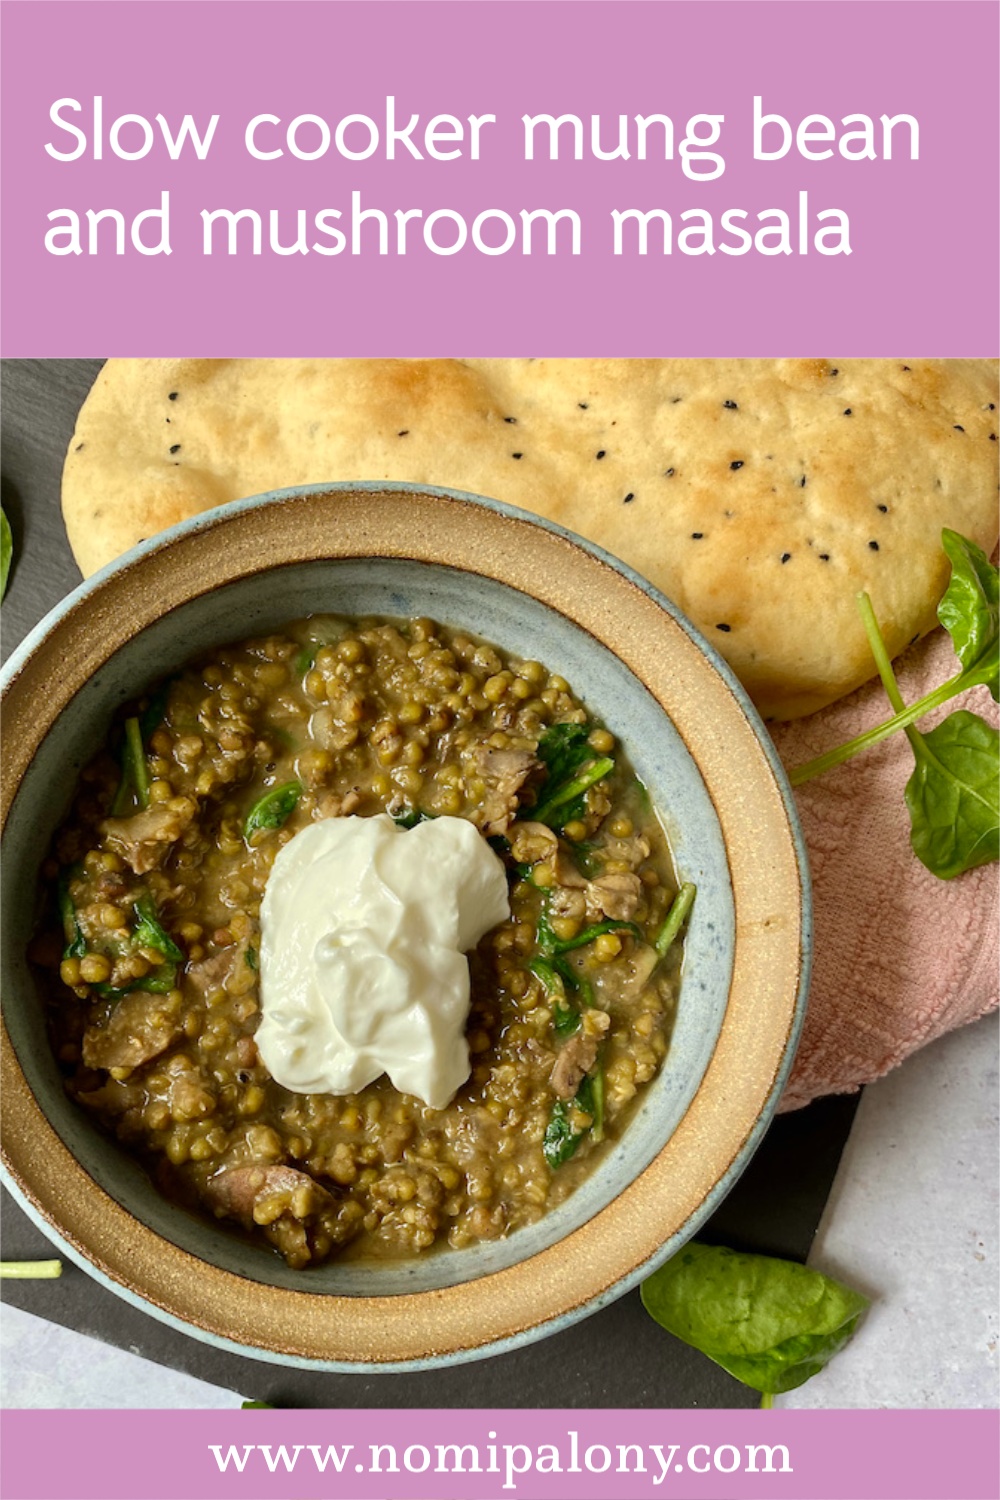 An easy and nutritious slow cooker mung bean and mushroom masala with 15g of protein and 35% of your daily calcium per portion.